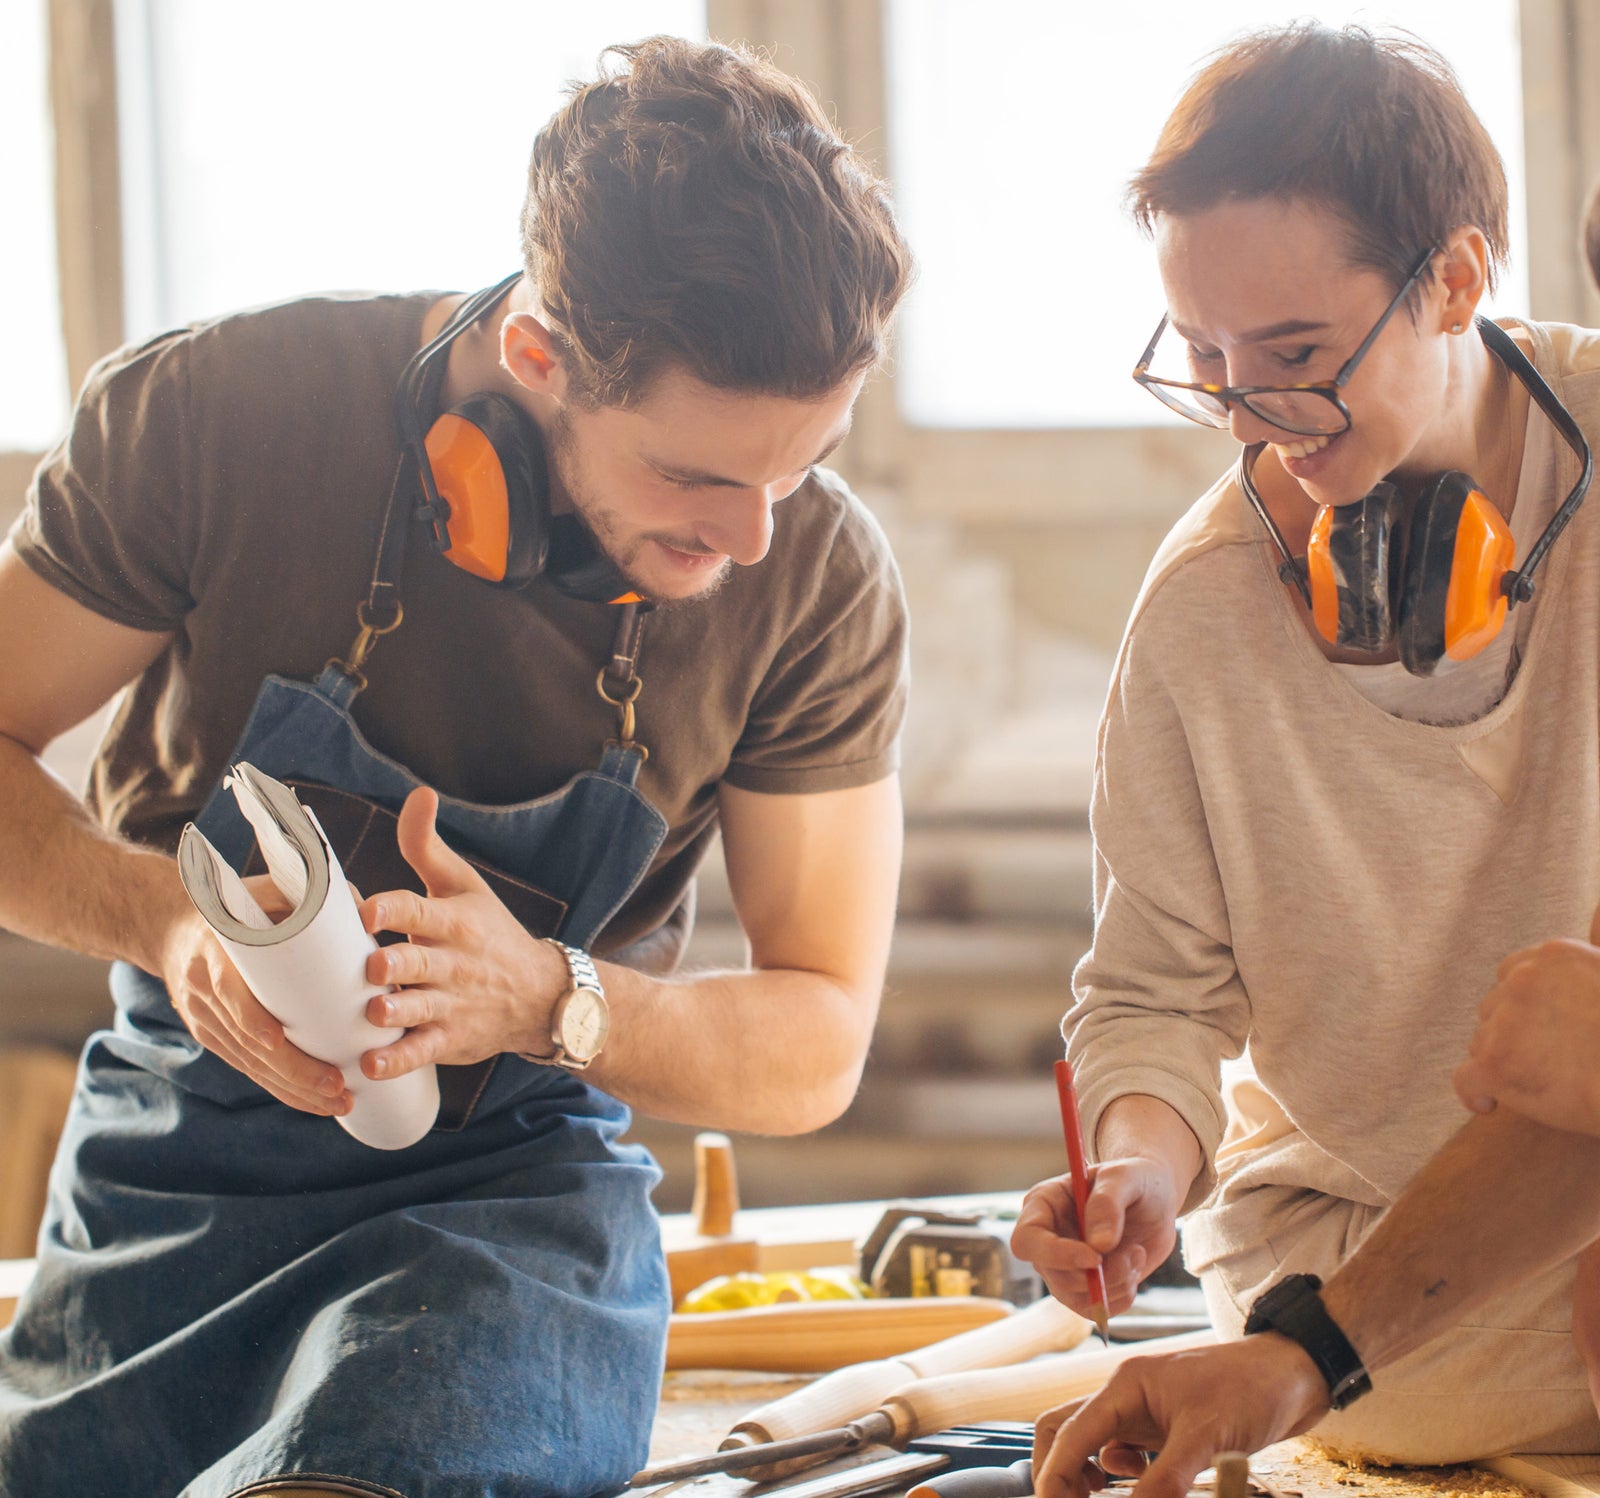 Free apprenticeships for under 25s (QLD)